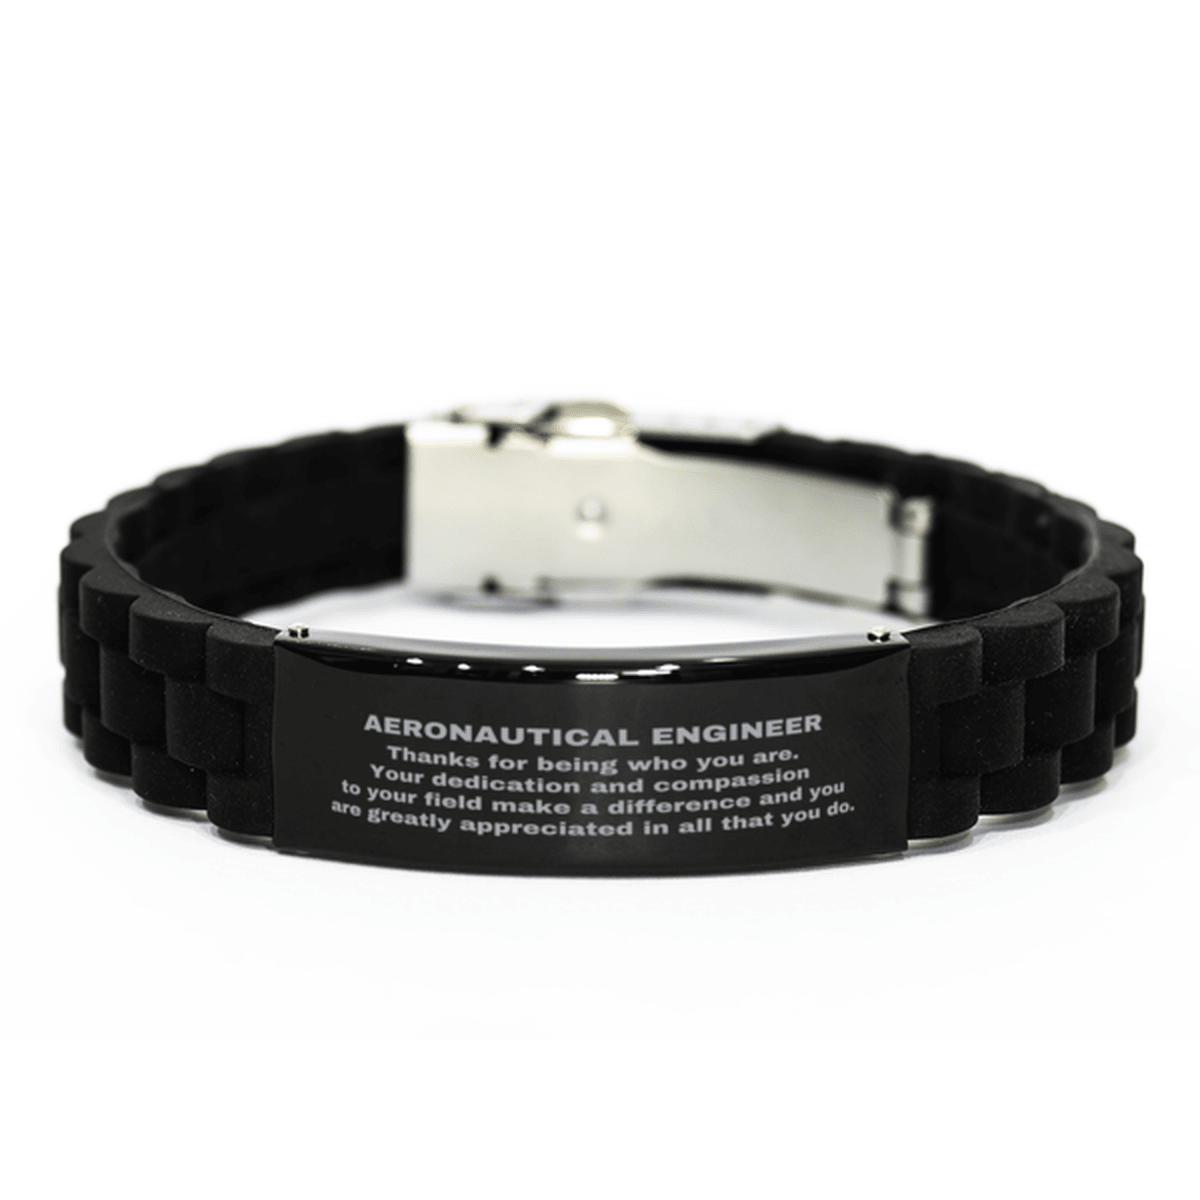 Aeronautical Engineer Black Glidelock Clasp Engraved Bracelet - Thanks for being who you are - Birthday Christmas Jewelry Gifts Coworkers Colleague Boss - Mallard Moon Gift Shop